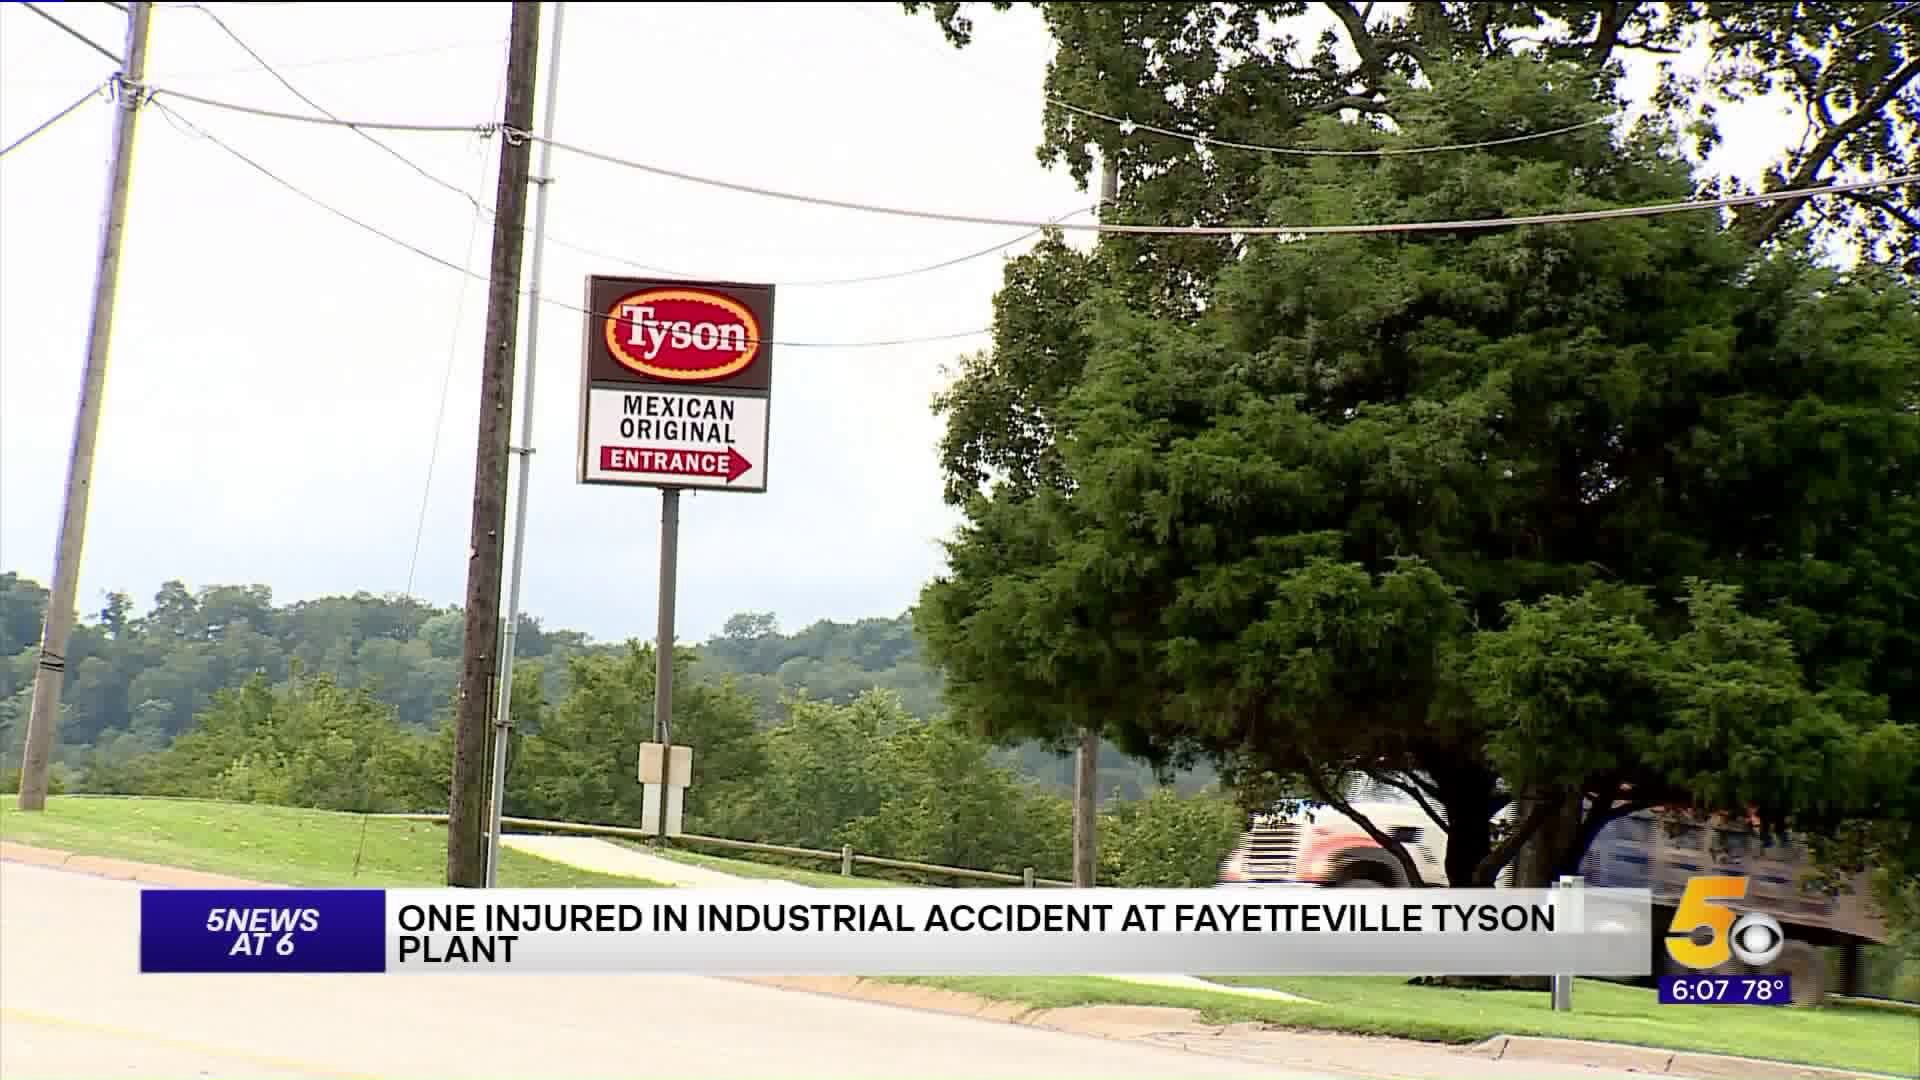 One Injured In Accident At Tyson Plant In Fayetteville